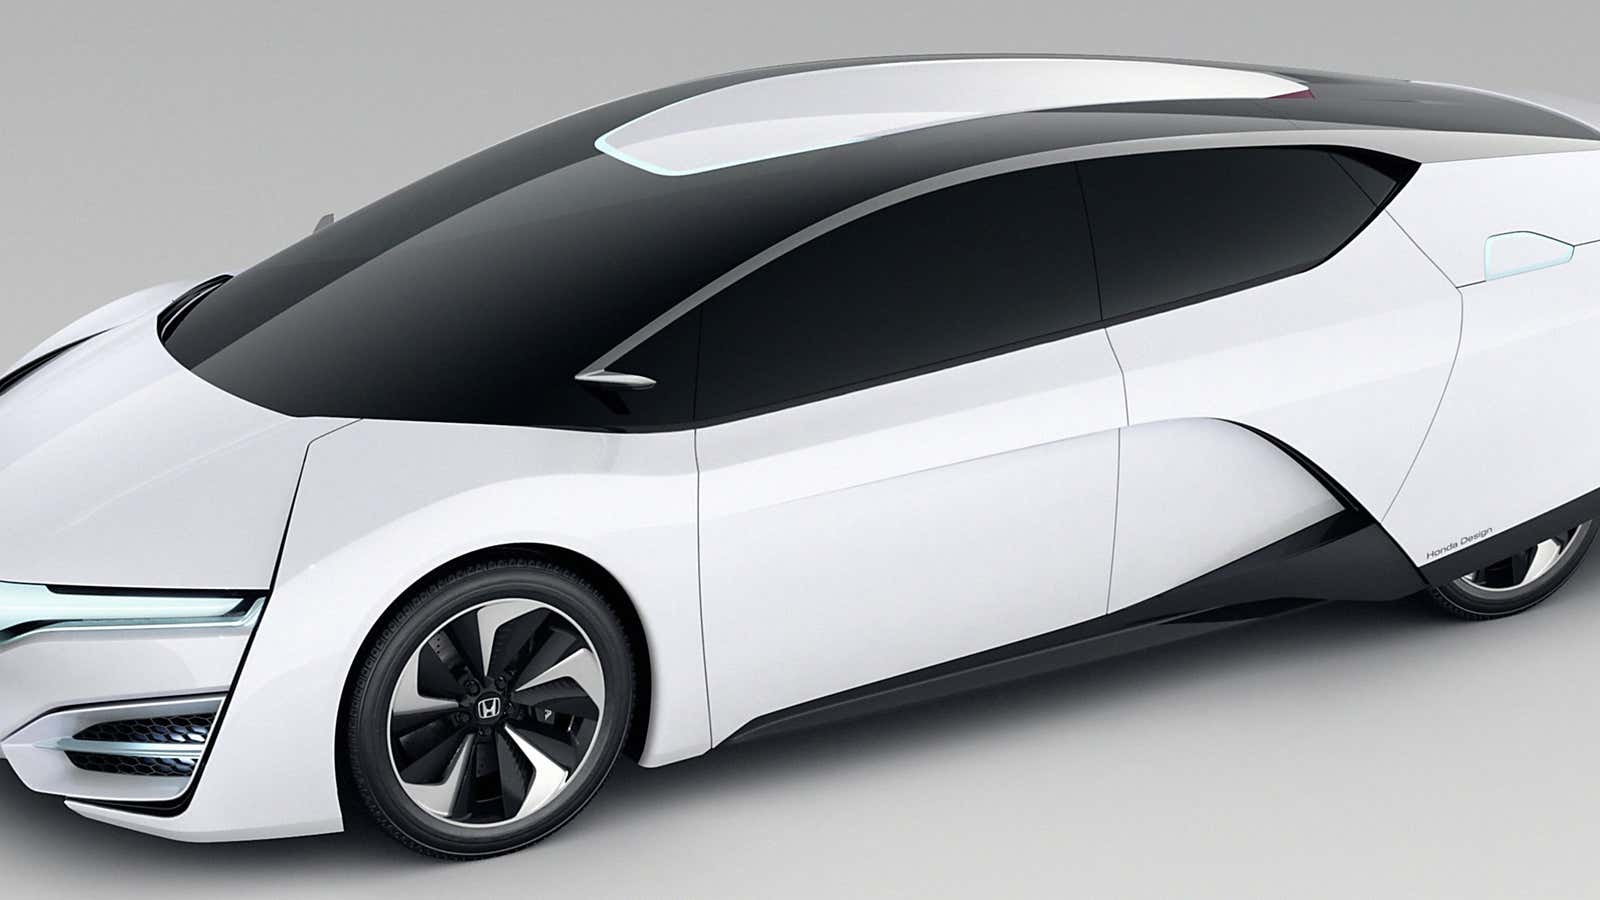 Ready for take-off: The Honda FCEV Concept.